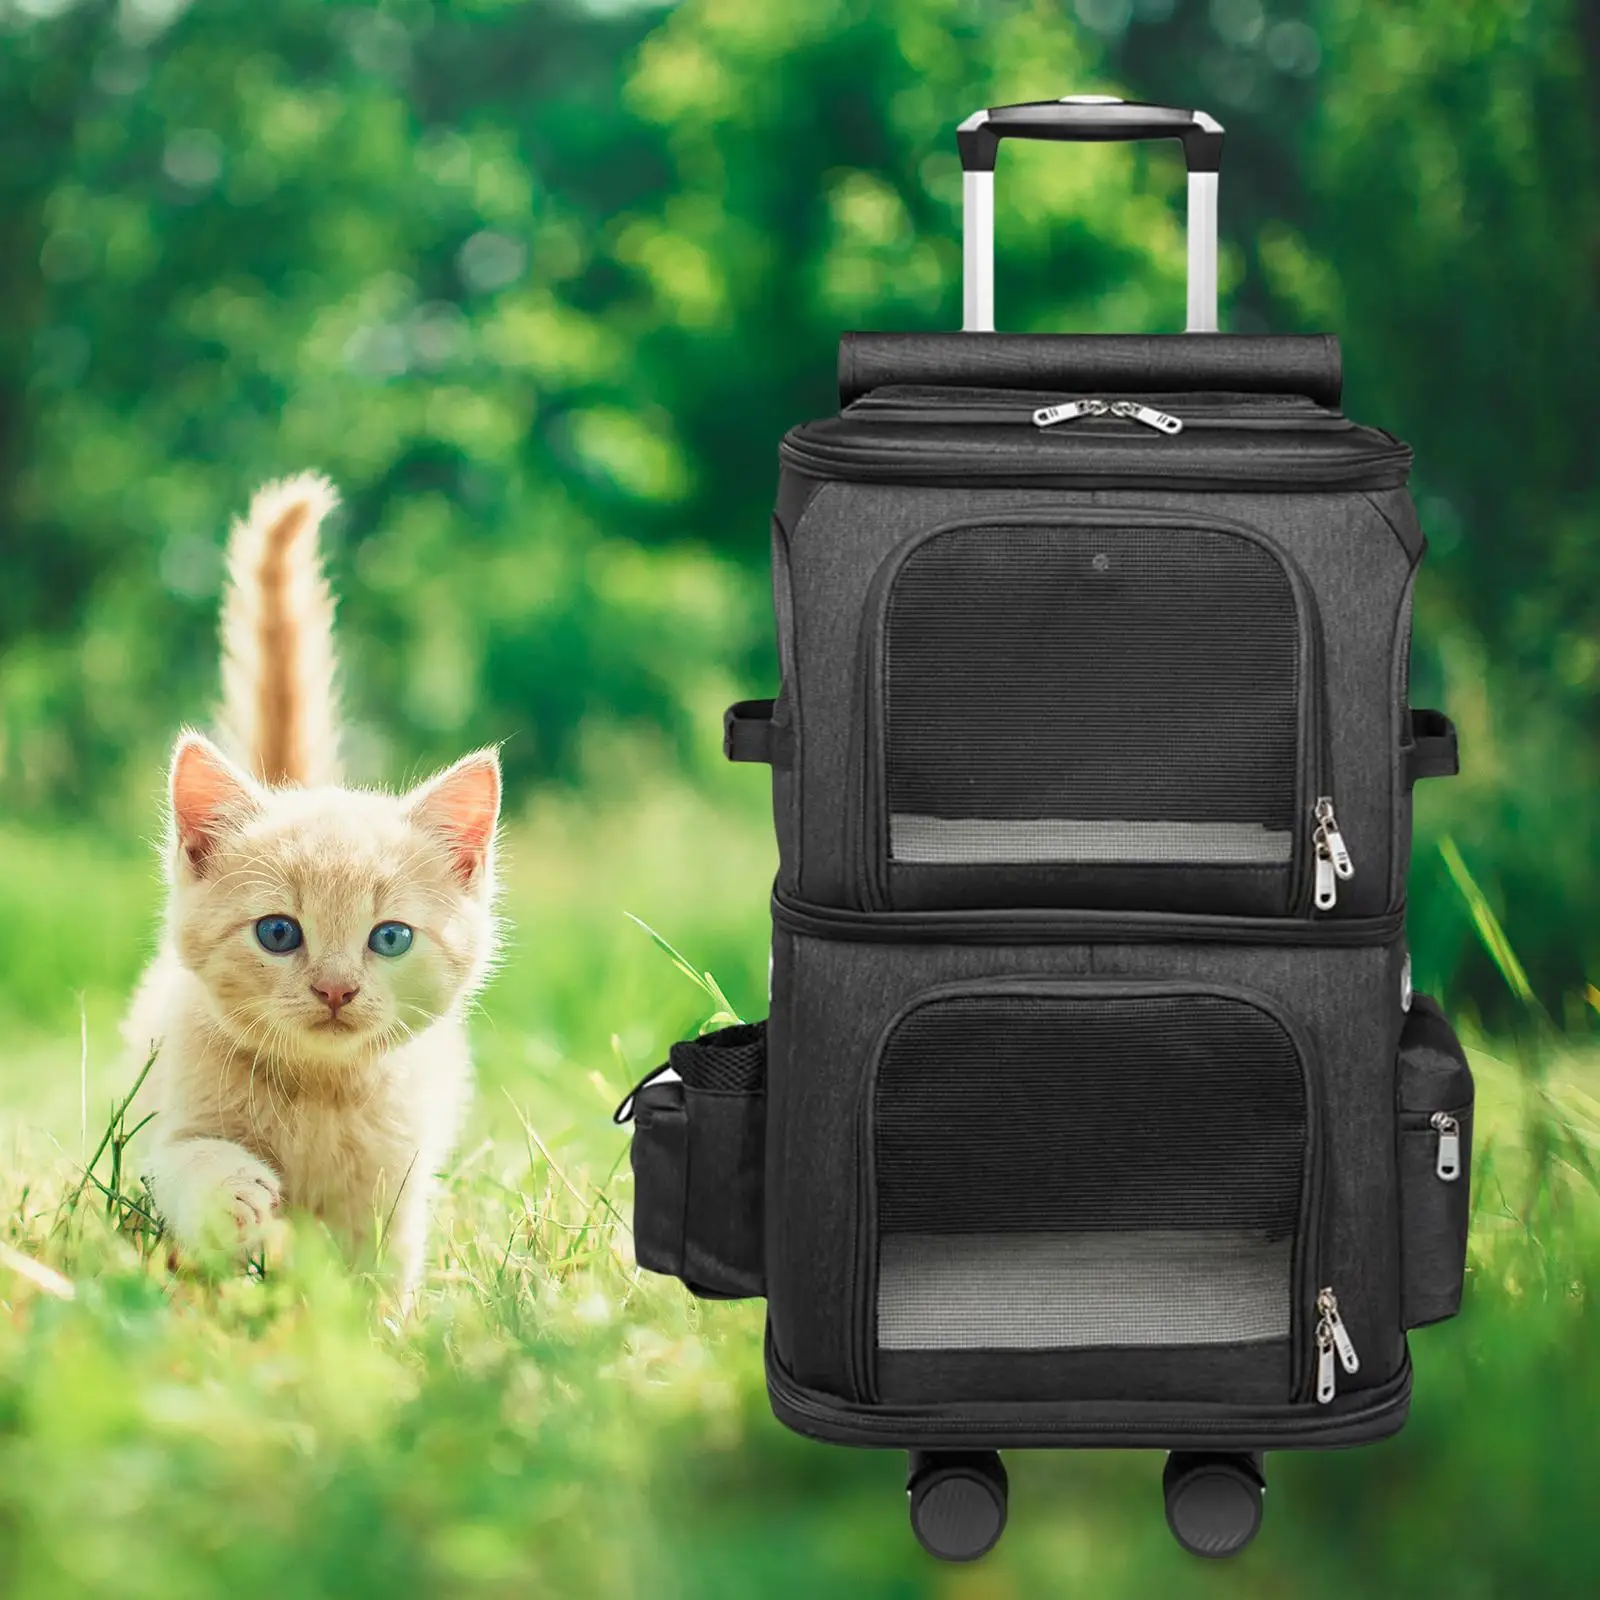 Cat Trolley Case Bag Pet Rolling Carrier Travel Tote with for